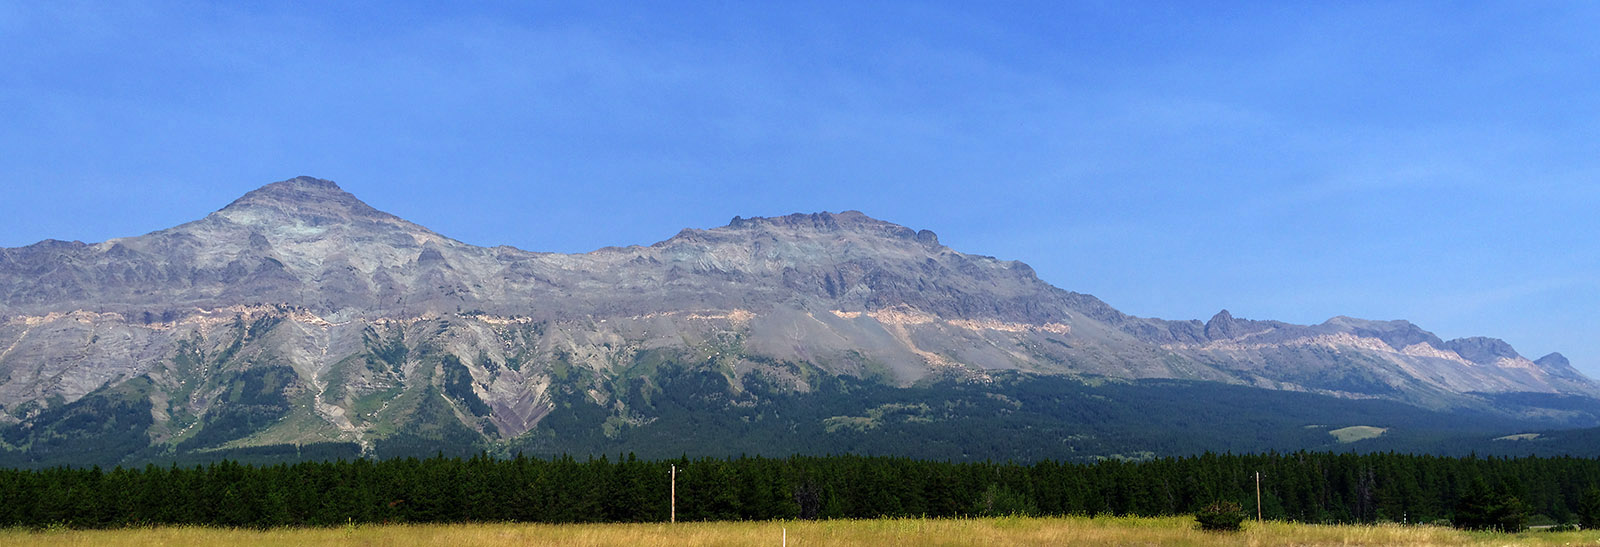 View from US Highway 2 at the Marias Pass looking North.  The Lewis overthrust fault runs along the junction between forest and paler upper levels to the right of the field.  Precambrian sedimentary layers overlie younger Cretaceous layers.